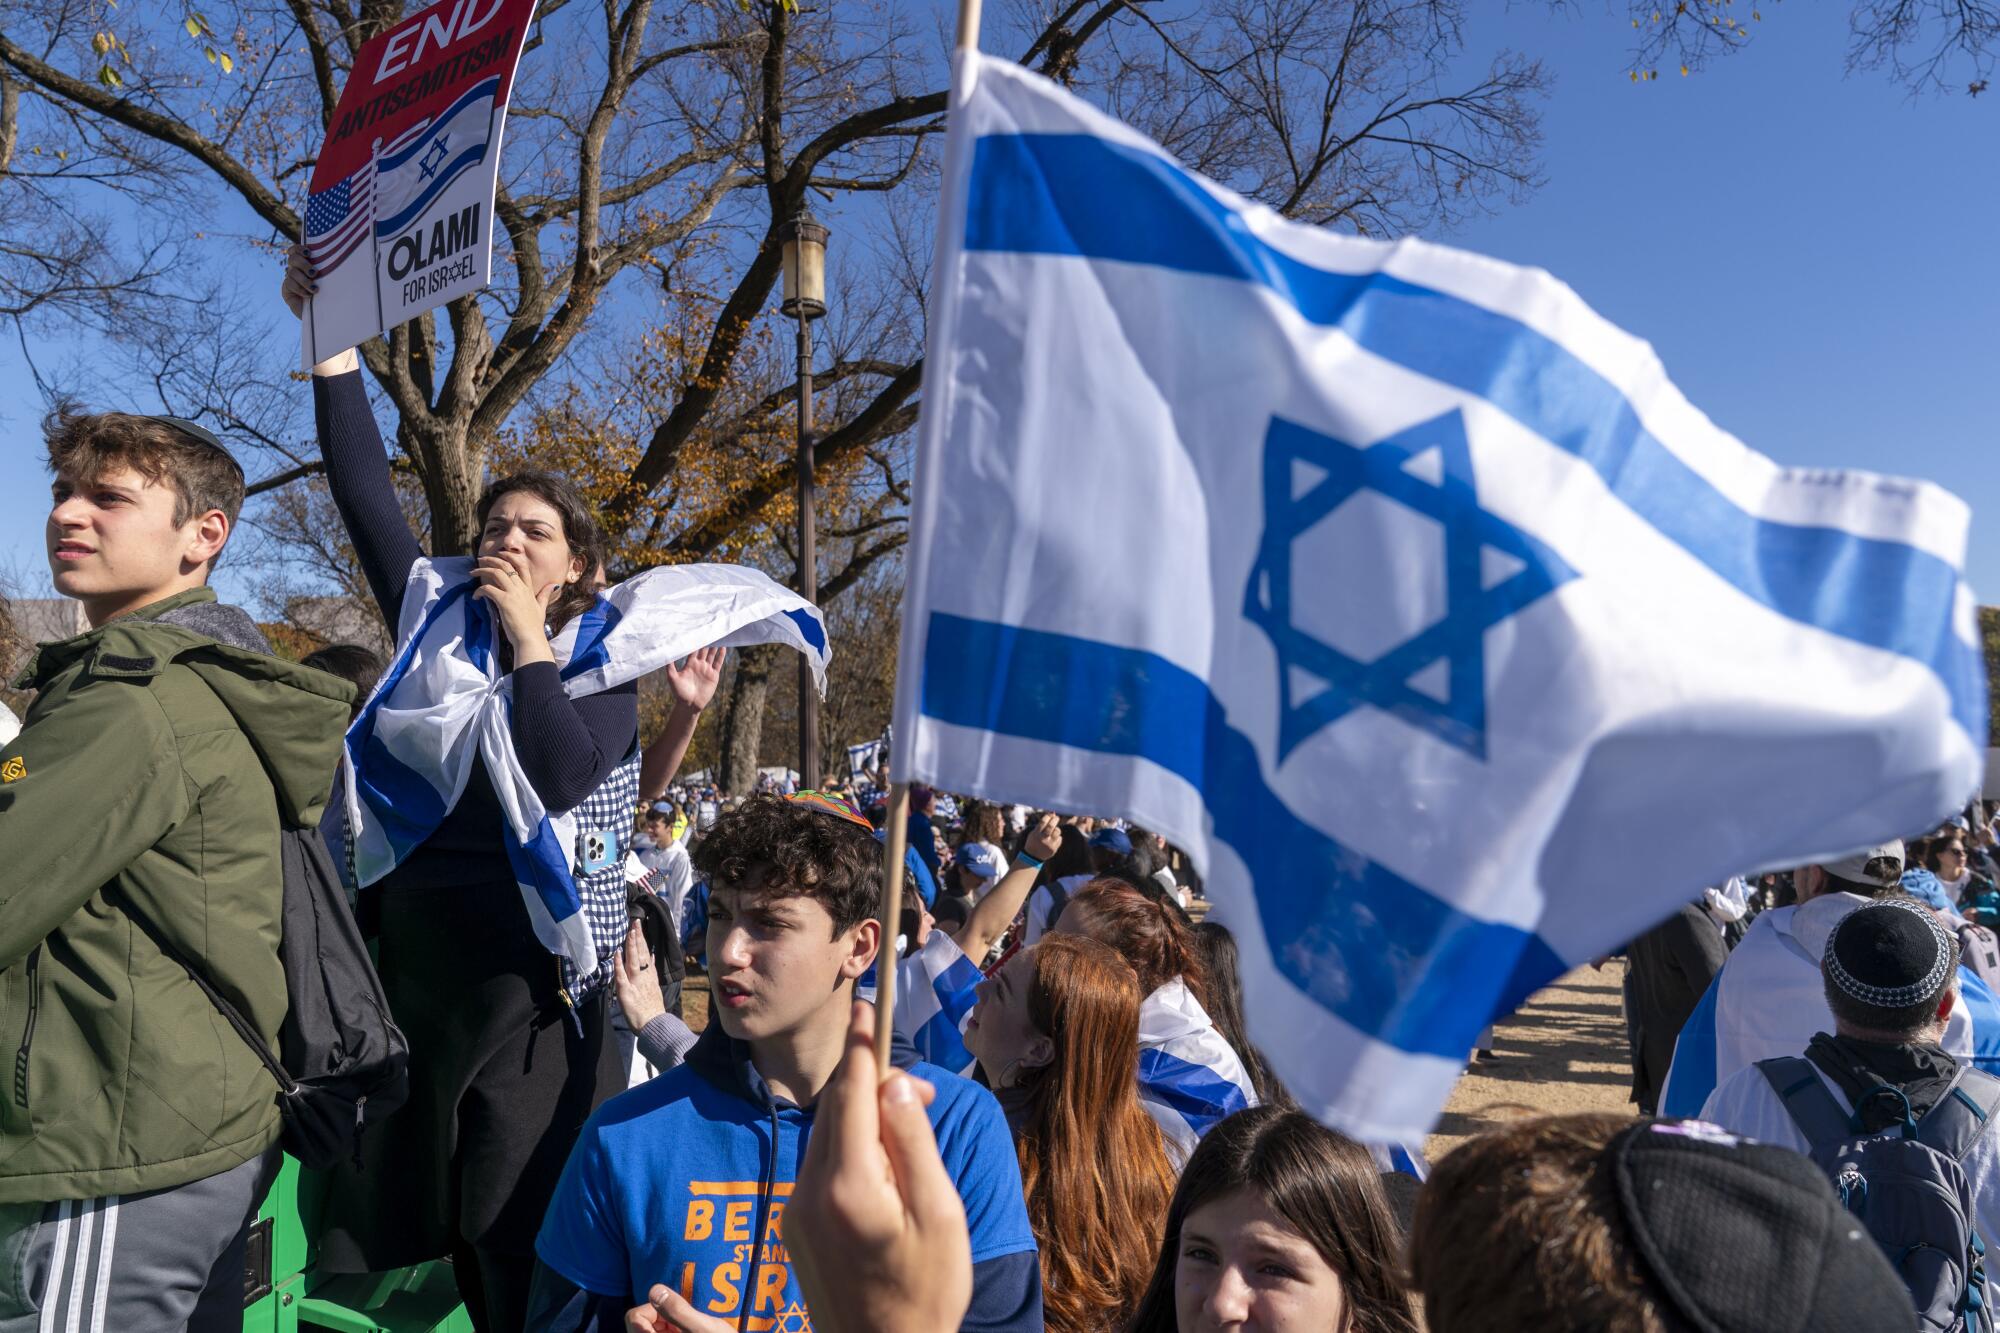 A person holding up a blue-and-white flag in a crowd of people with similar flags